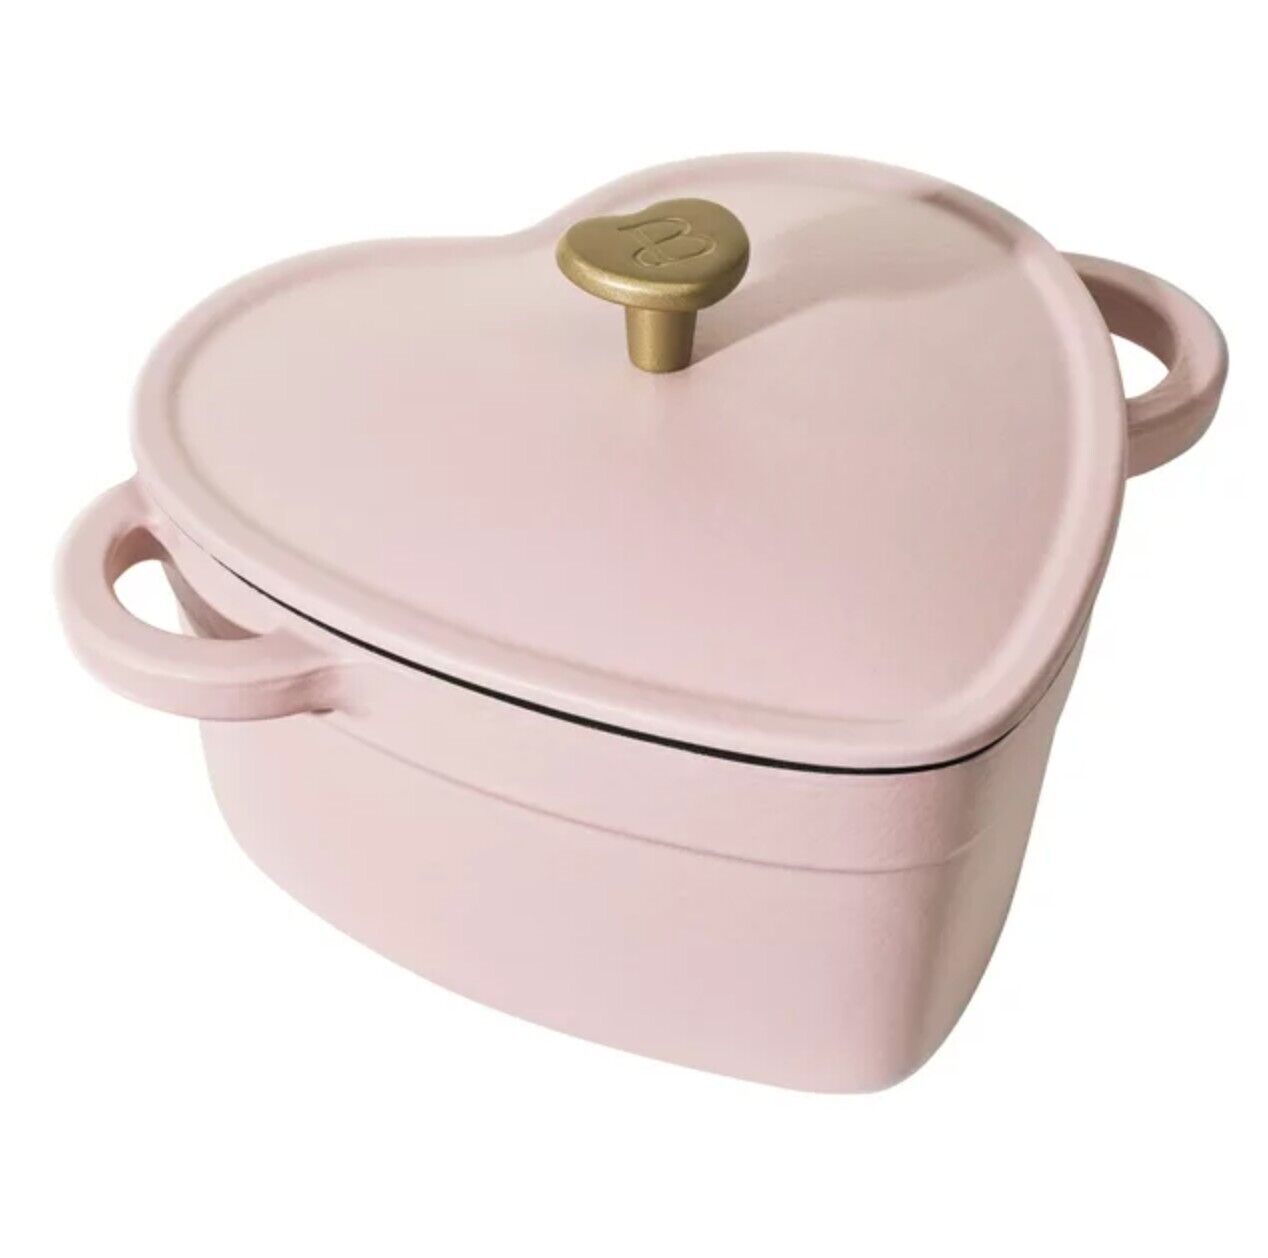  Beautiful 2QT Heart Dutch Oven in Pink Champagne by Drew Barrymore